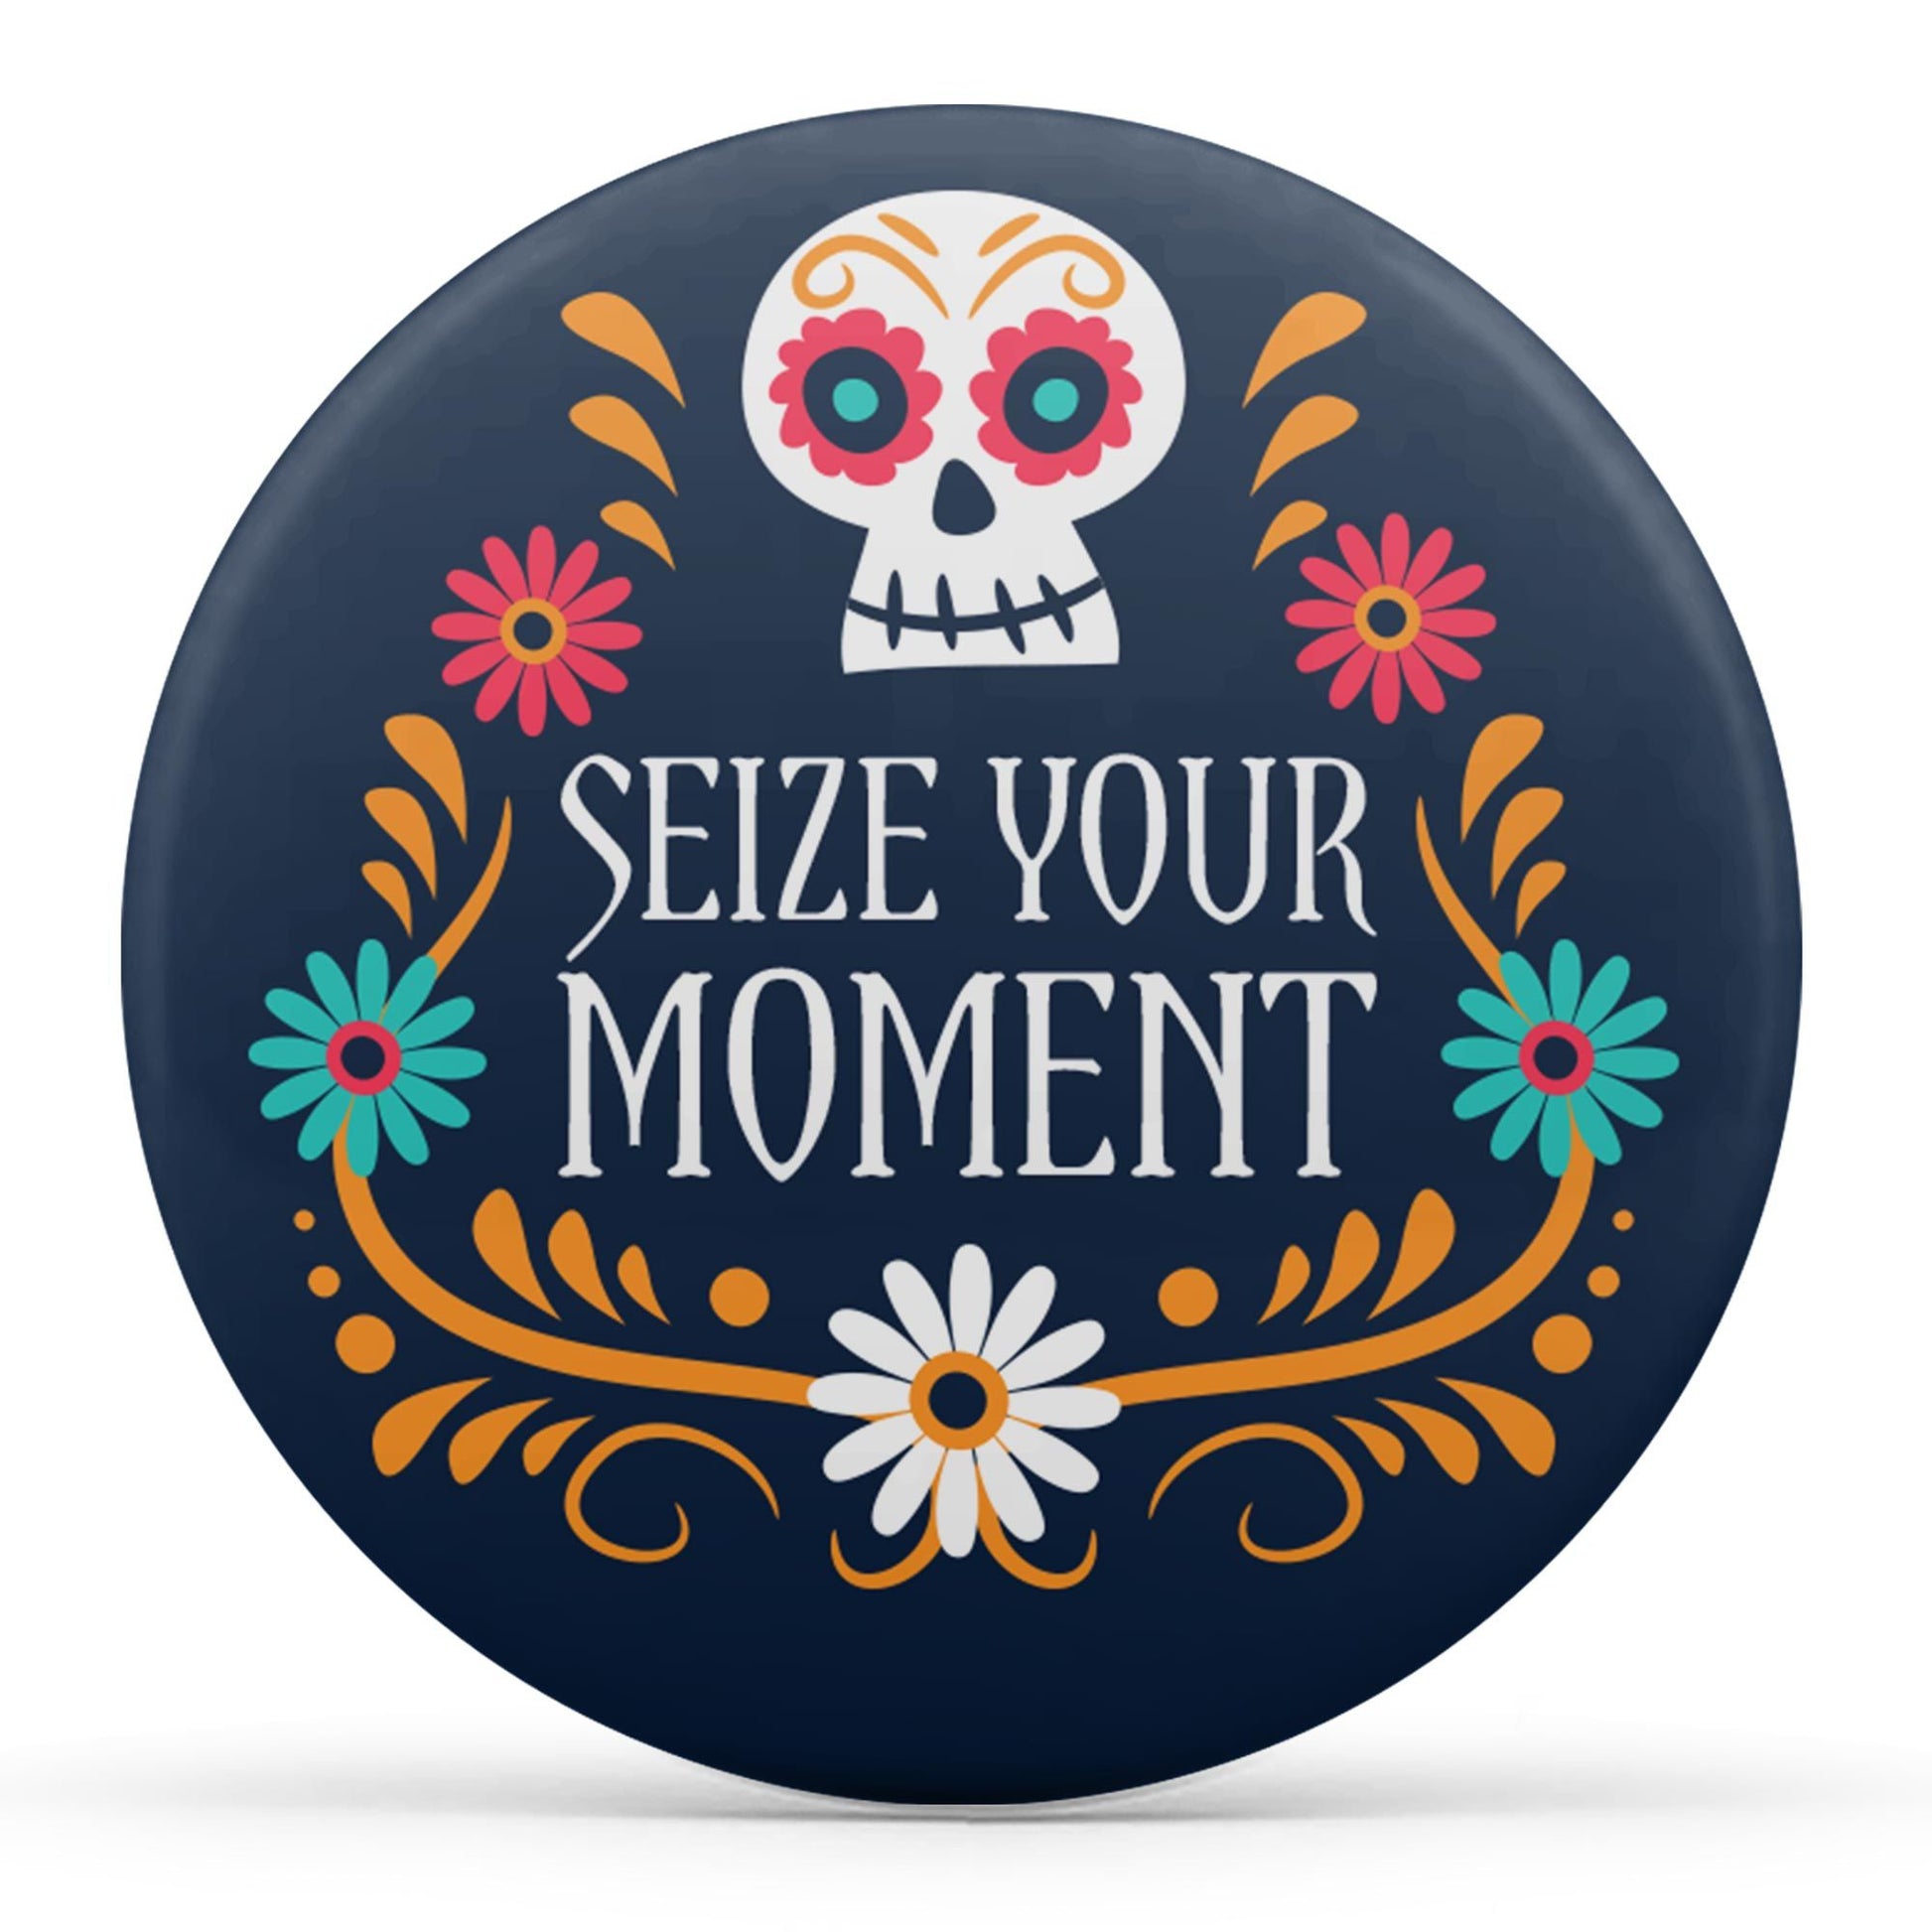 Seize Your Moment Image